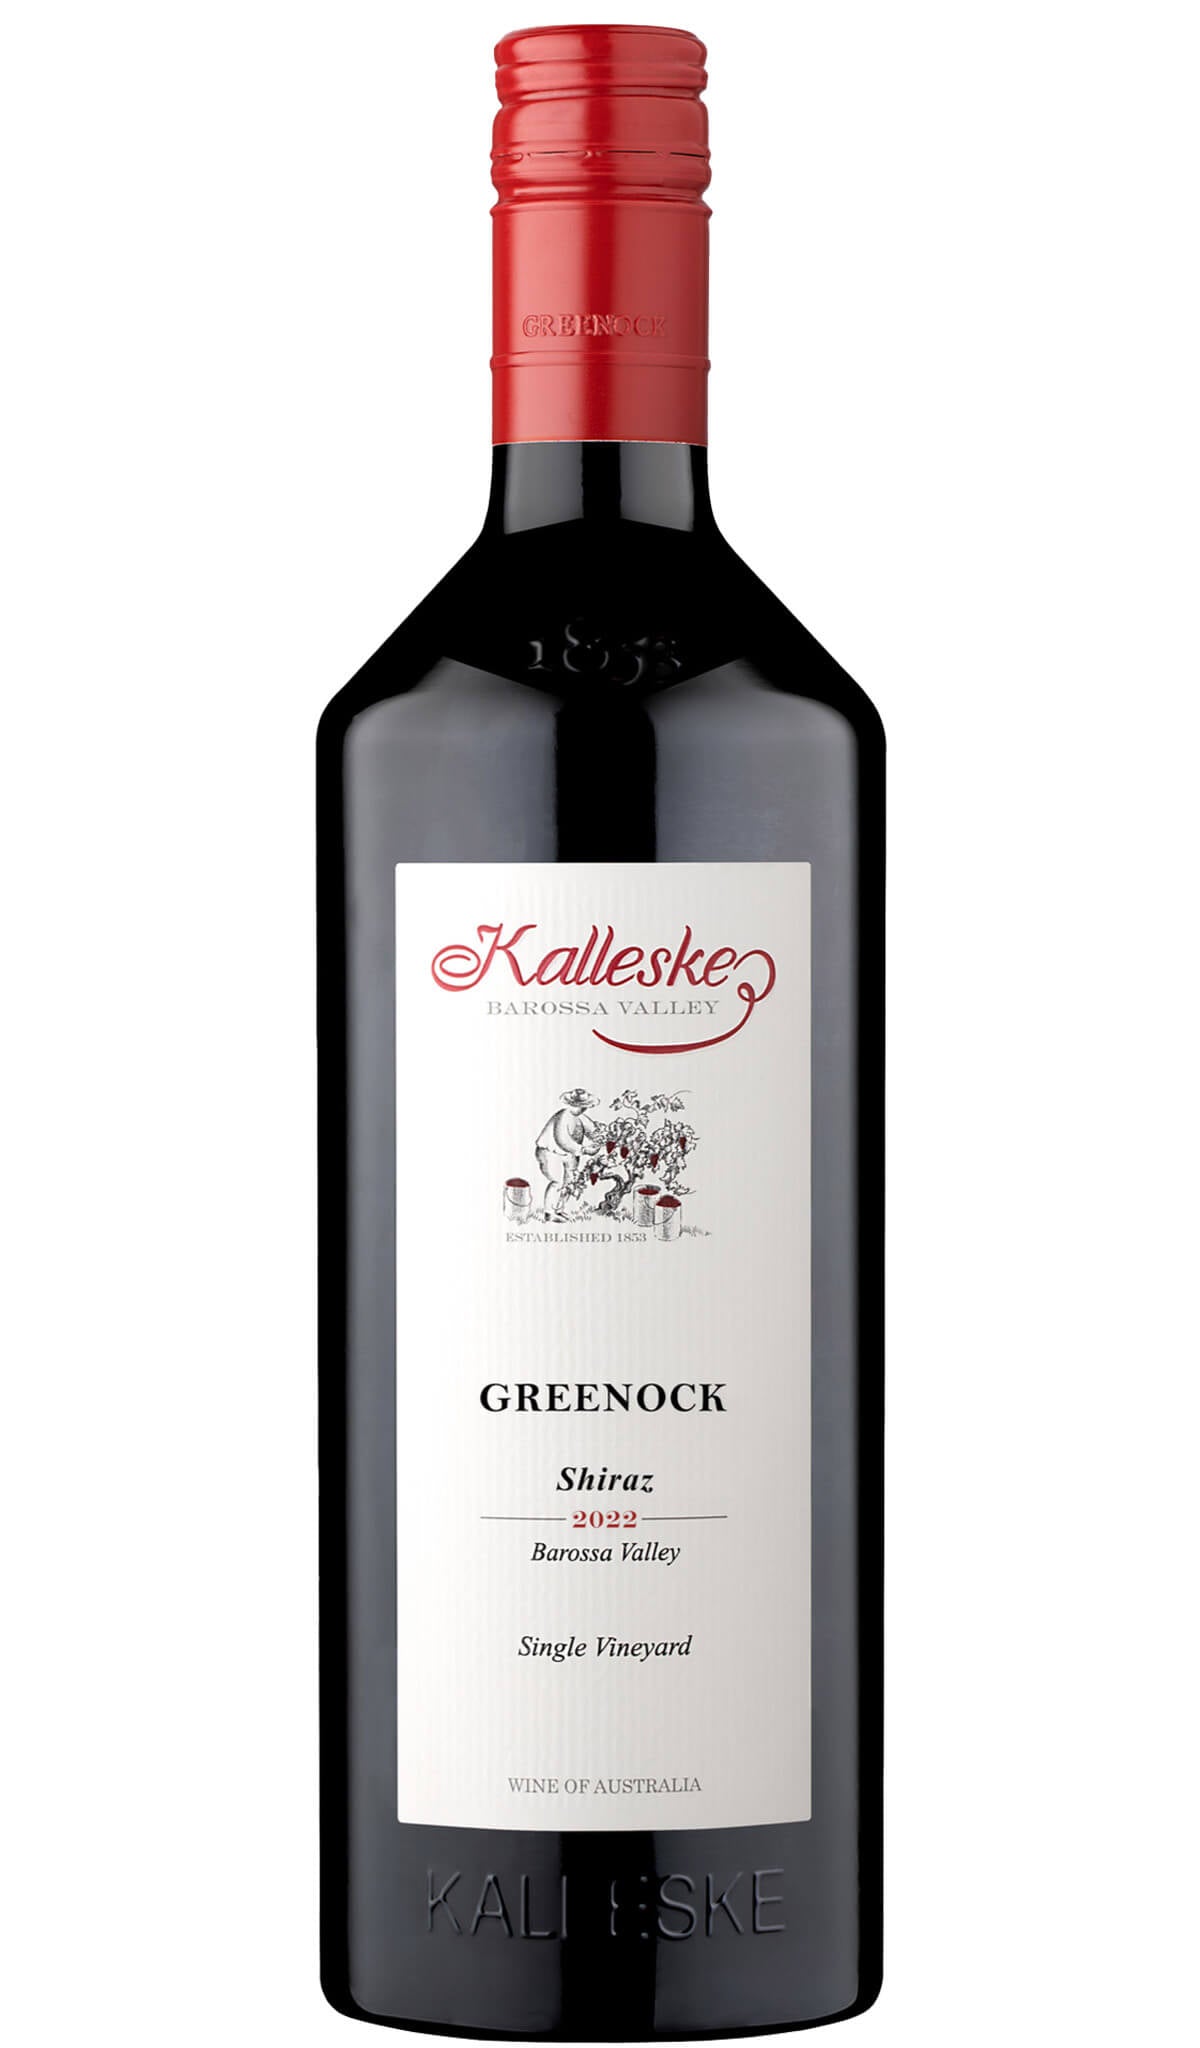 Find out more or buy Kalleske Greenock Shiraz 2022 (Barossa Valley) online at Wine Sellers Direct - Australia’s independent liquor specialists.